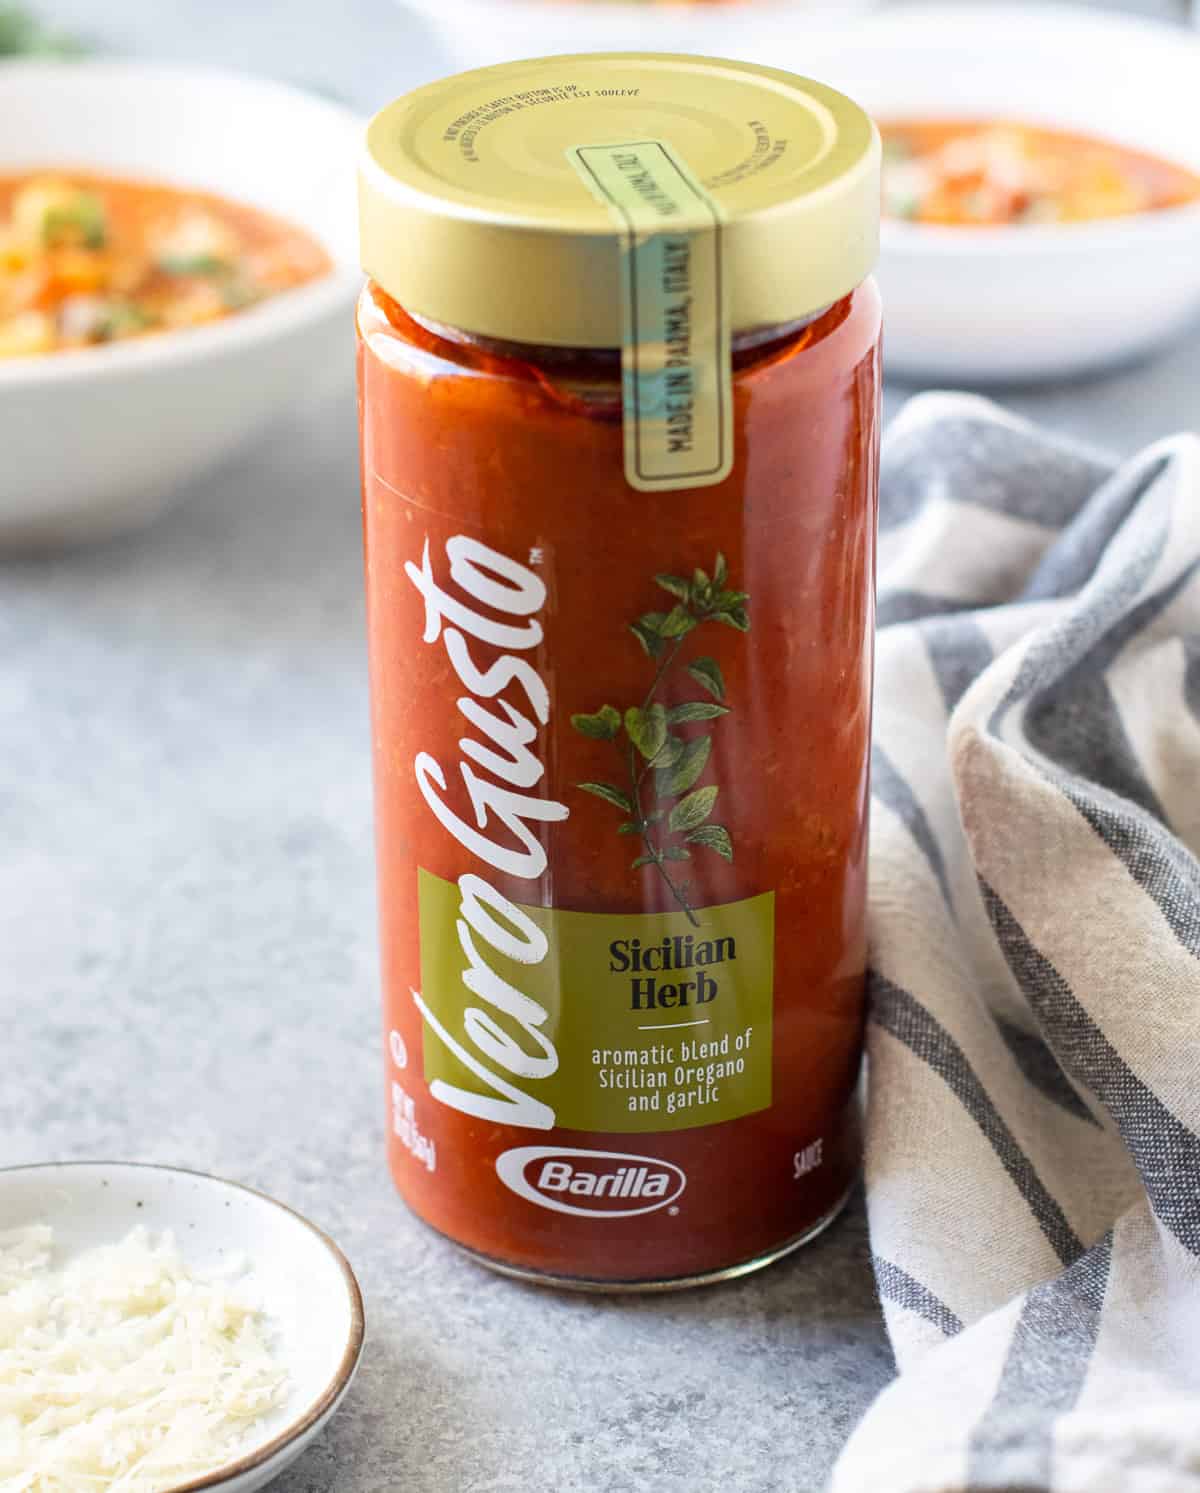 Vero Gusto Pasta Sauce Jar with a napkin on the side